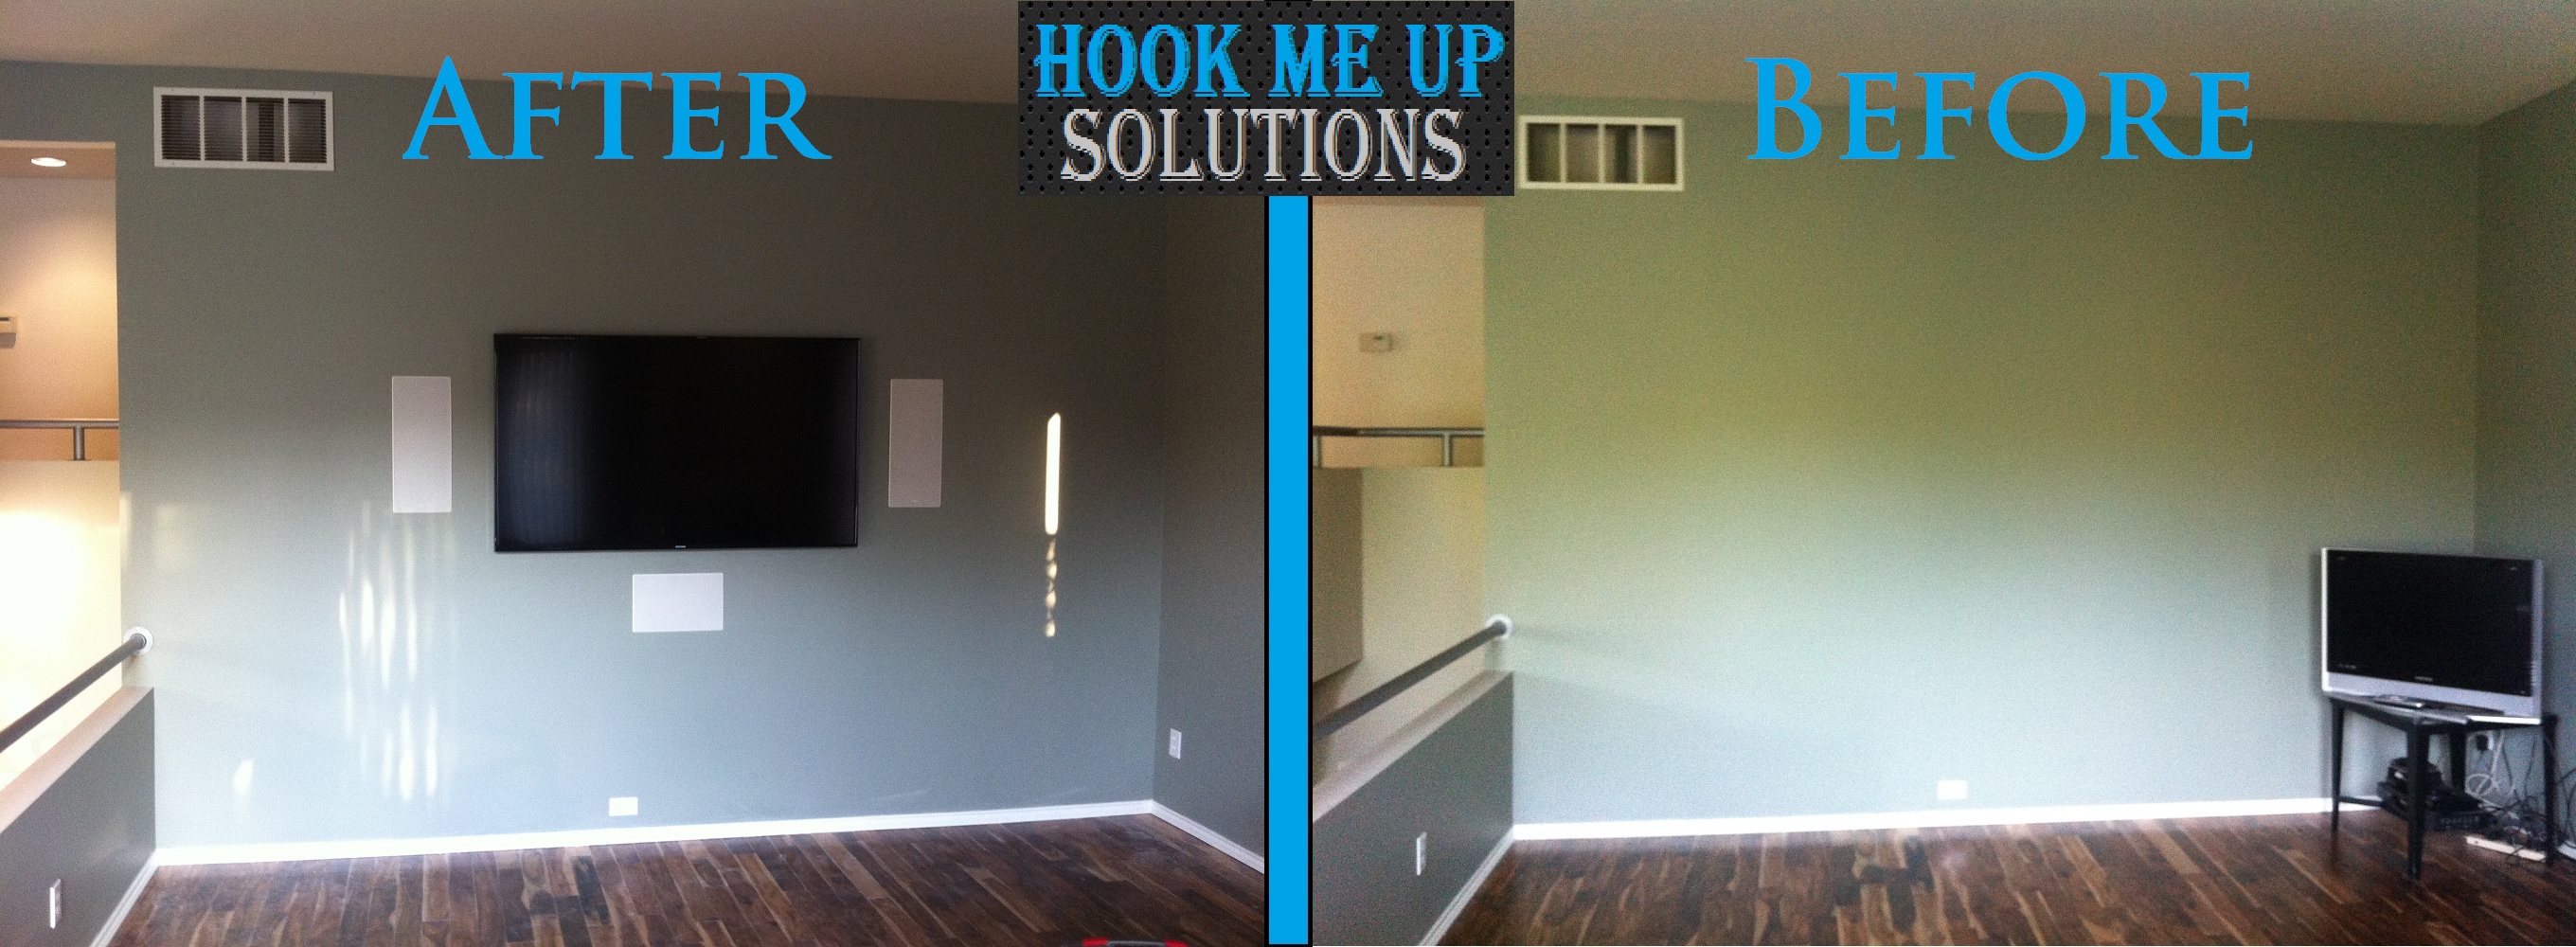 Hook Me Up Solutions - How To Mount A TV On The Wall